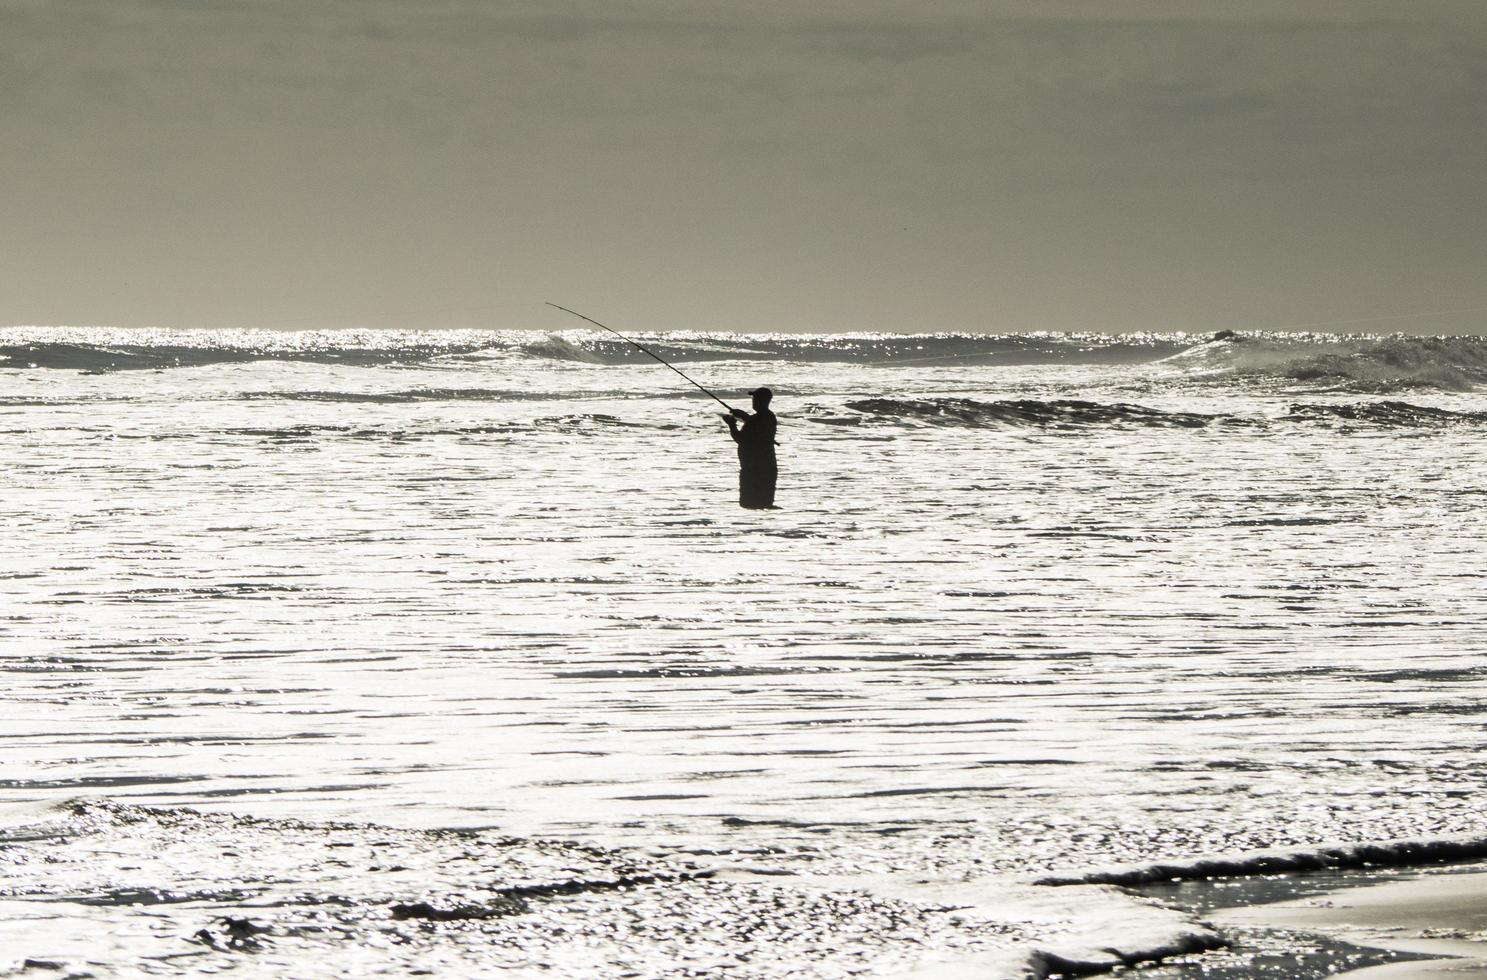 A fisherman in the ocean photo